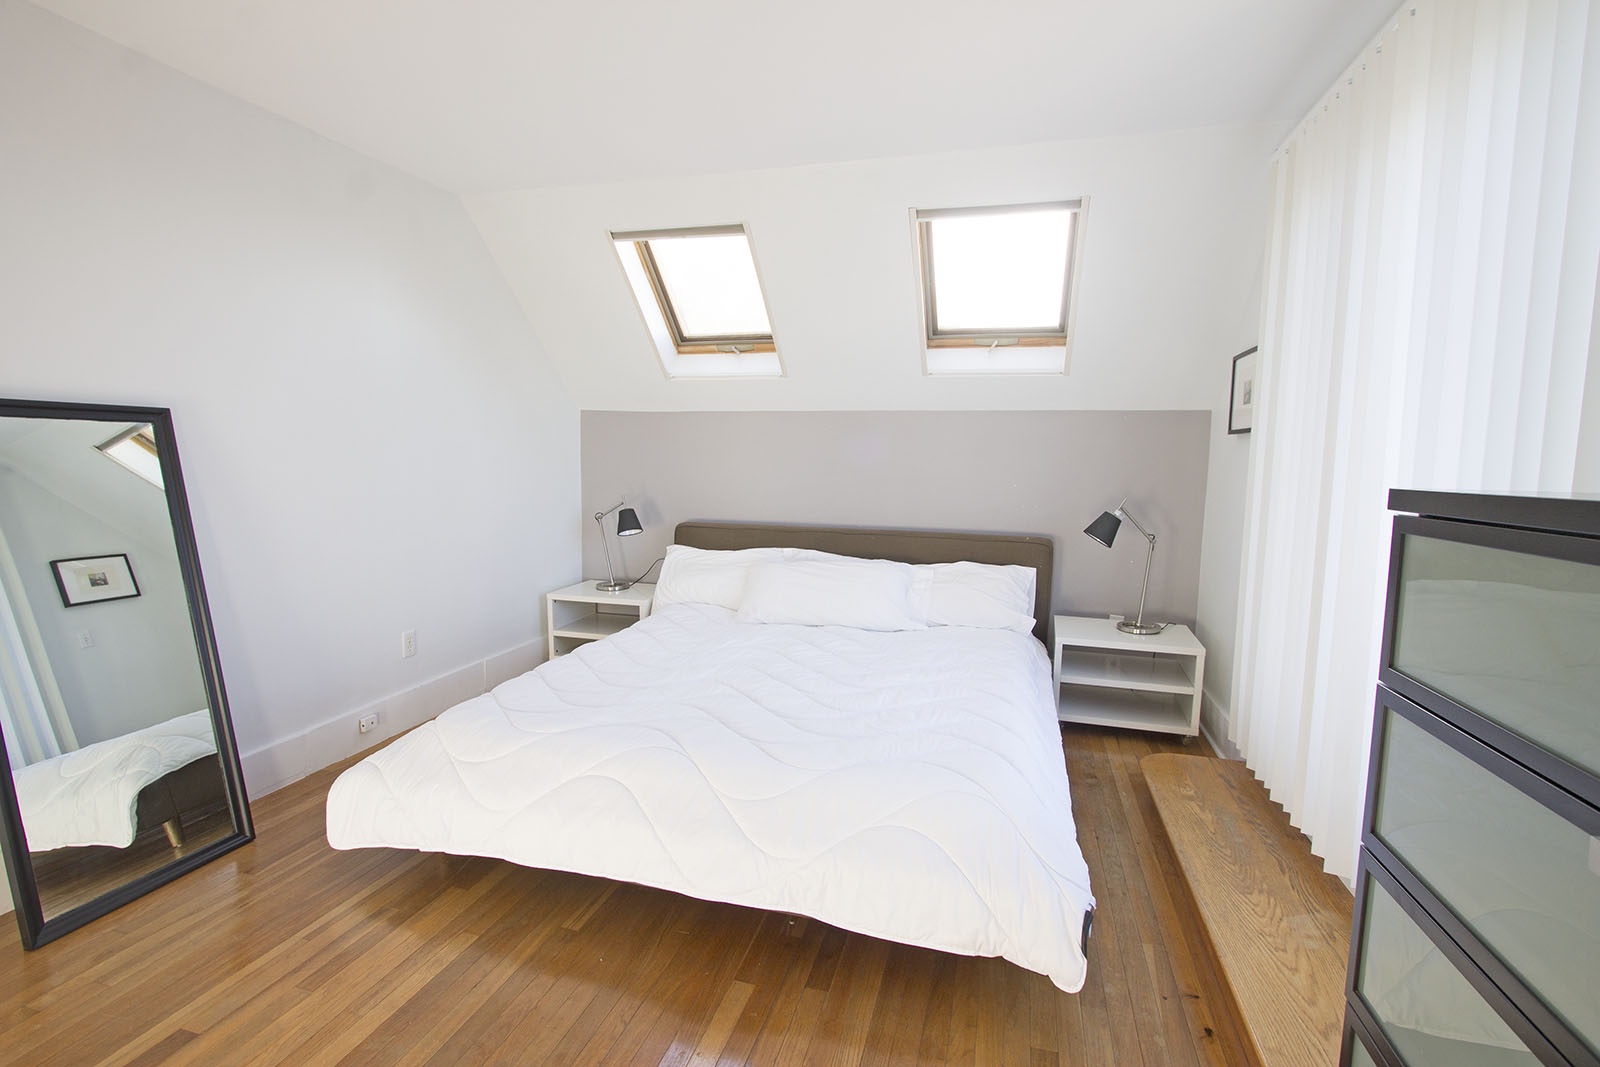 BR 1: Primary bedroom with King bed and skylights and sliders to a balcony.